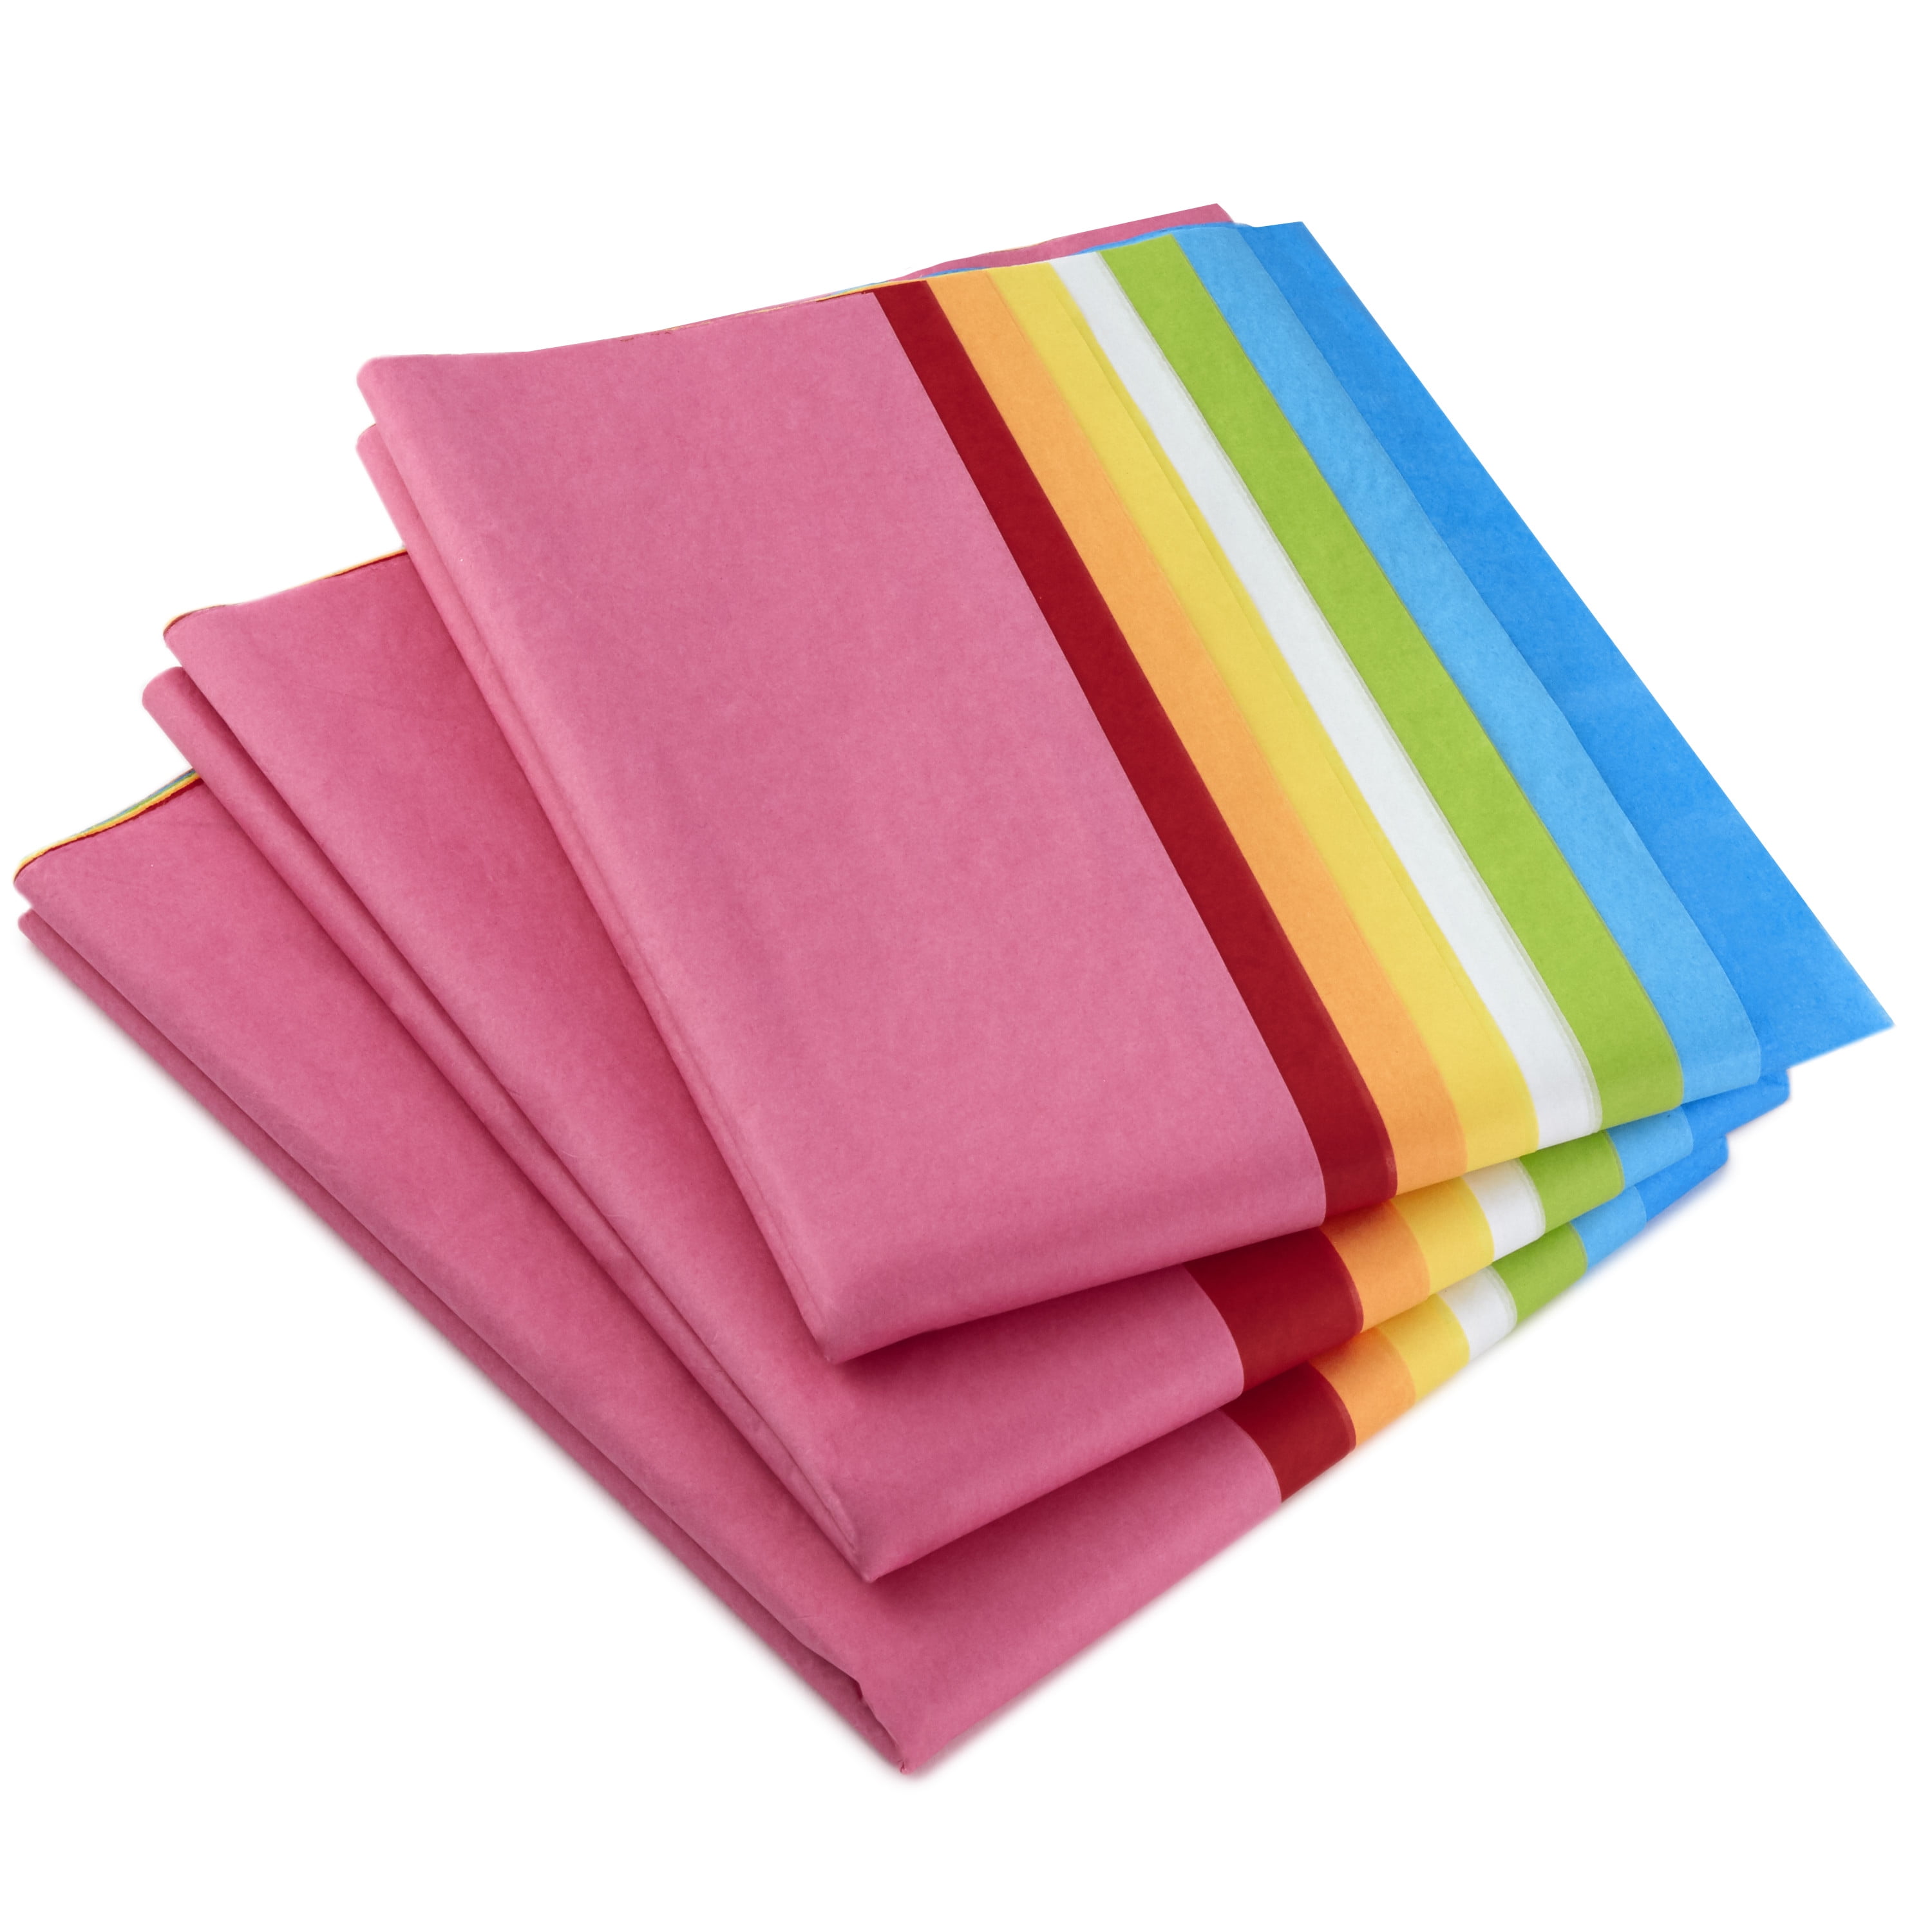 Hallmark Tissue Paper (Classic Rainbow, 8 Colors) 120 Sheets for Gift Wrap,  Crafts, DIY Paper Flowers, Tassel Garland and More 